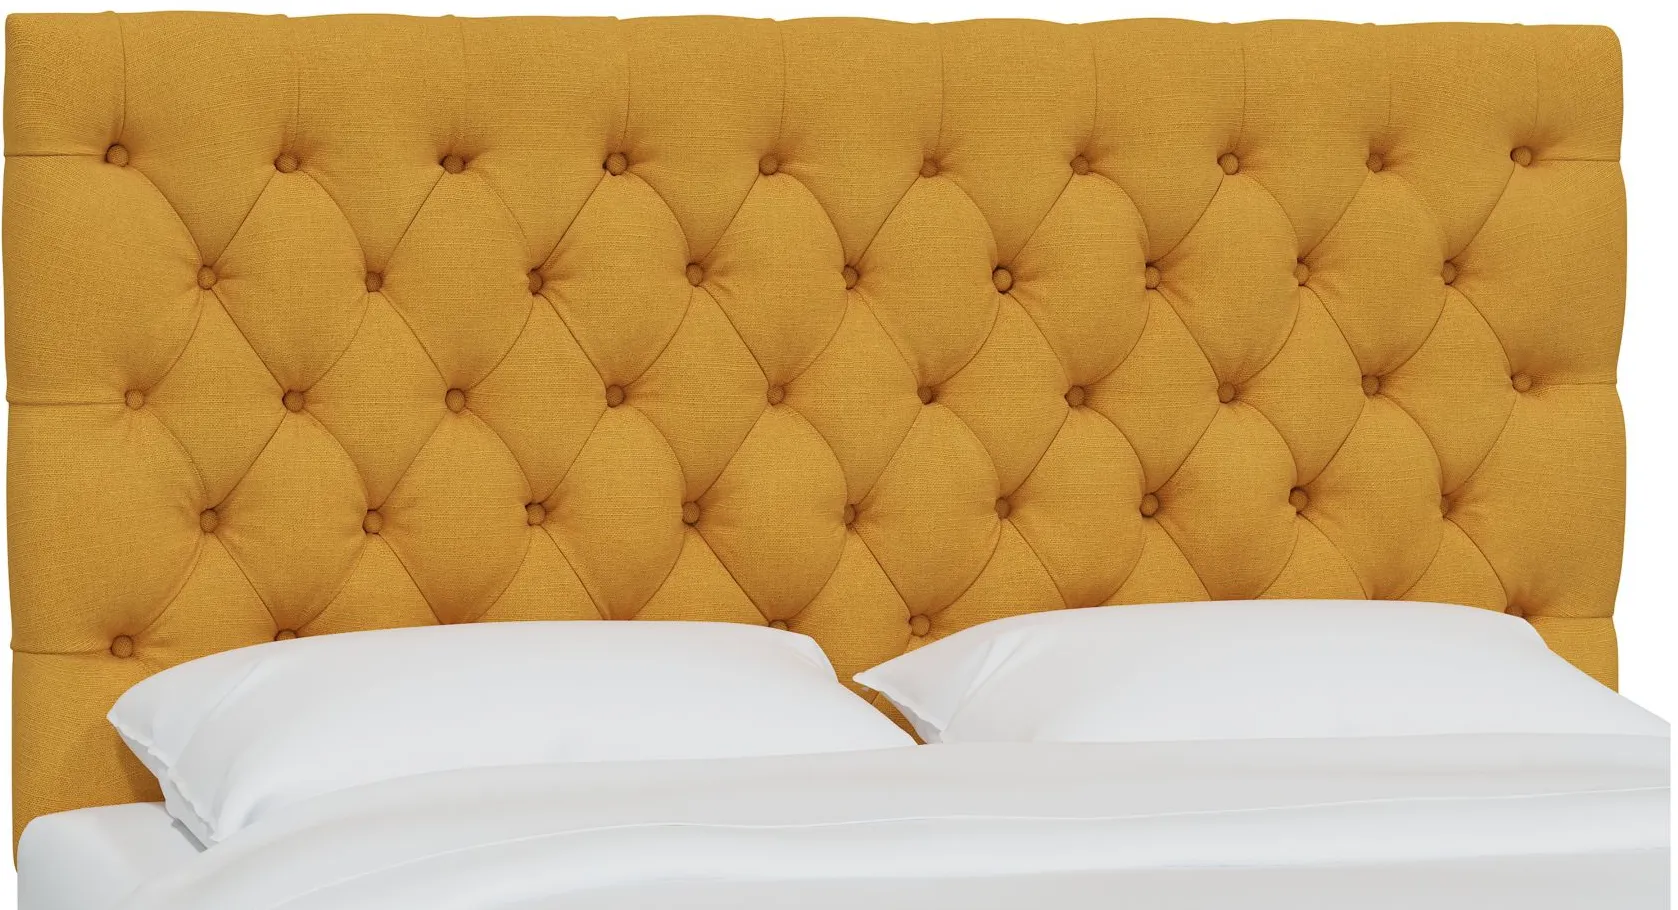 Queensbury Headboard in Linen French Yellow by Skyline